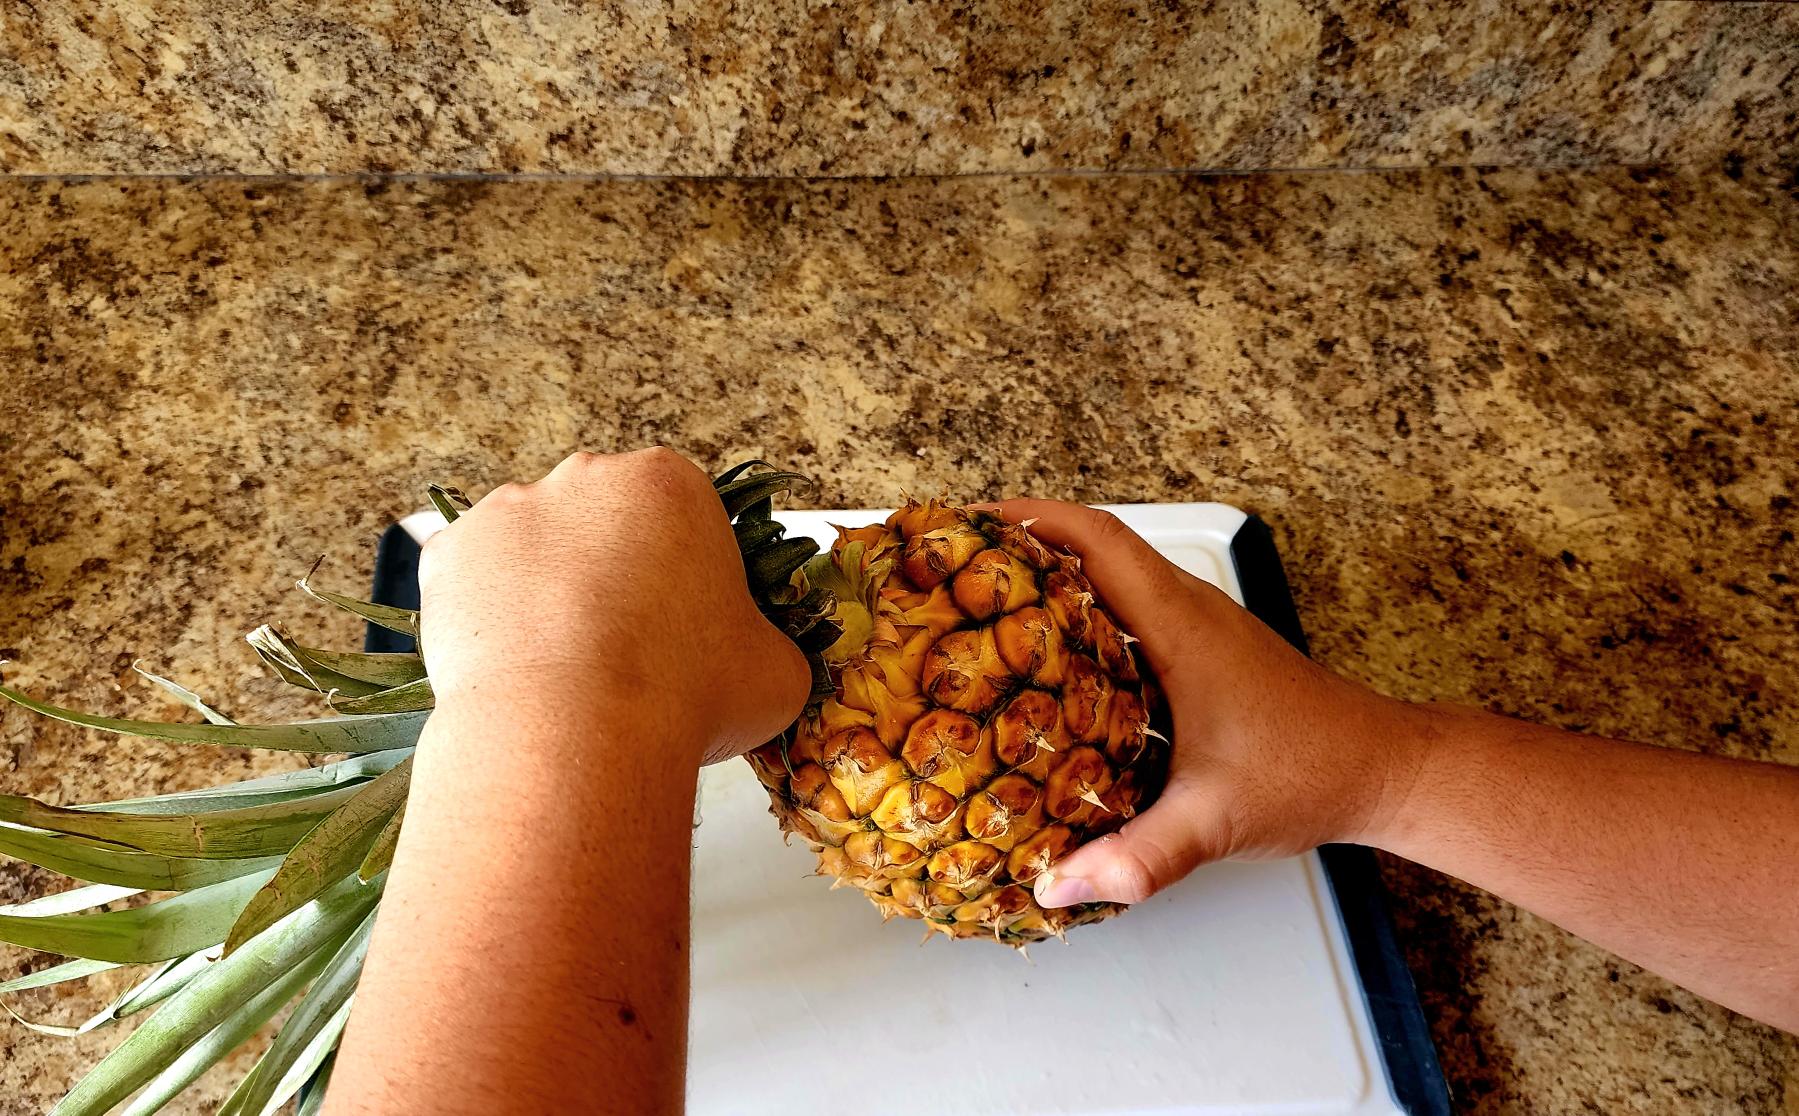 Photo of removing the flower from the whole pineapple. Get ready to prepare your vaifala (pineapple drink). 